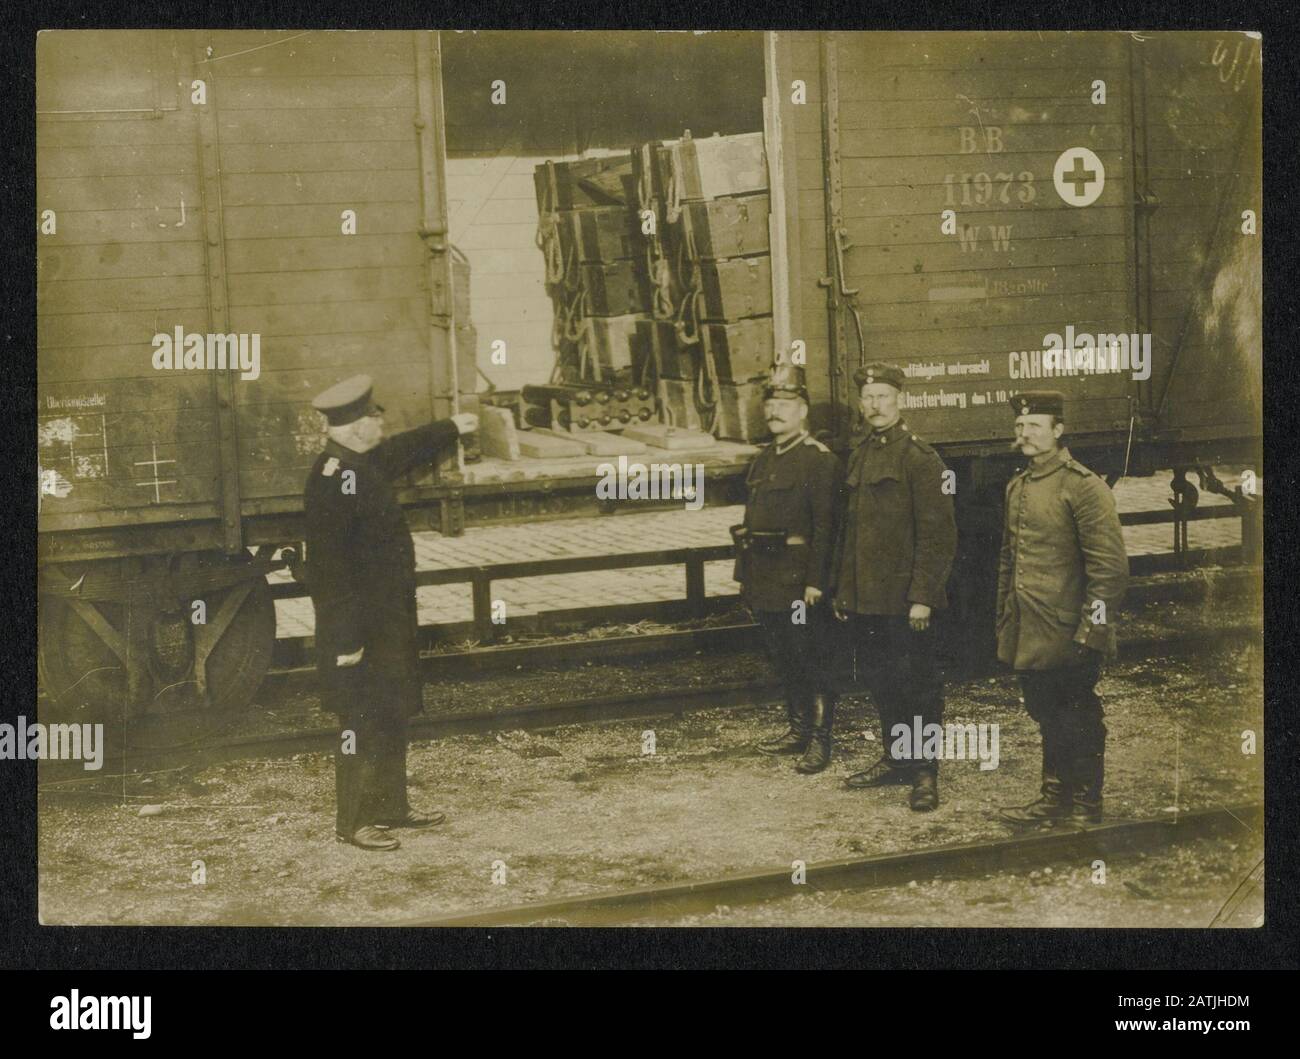 Description: Soldiers at a German train carrying Russian markings also Annotation: Railway wagon containing ammunition boxes. On the side is Red Cross sign to see. The man left in the row is a policeman. The man on the far left seems a railway employee Date: {1914-1918} Keywords: WWI, military, railway Stock Photo